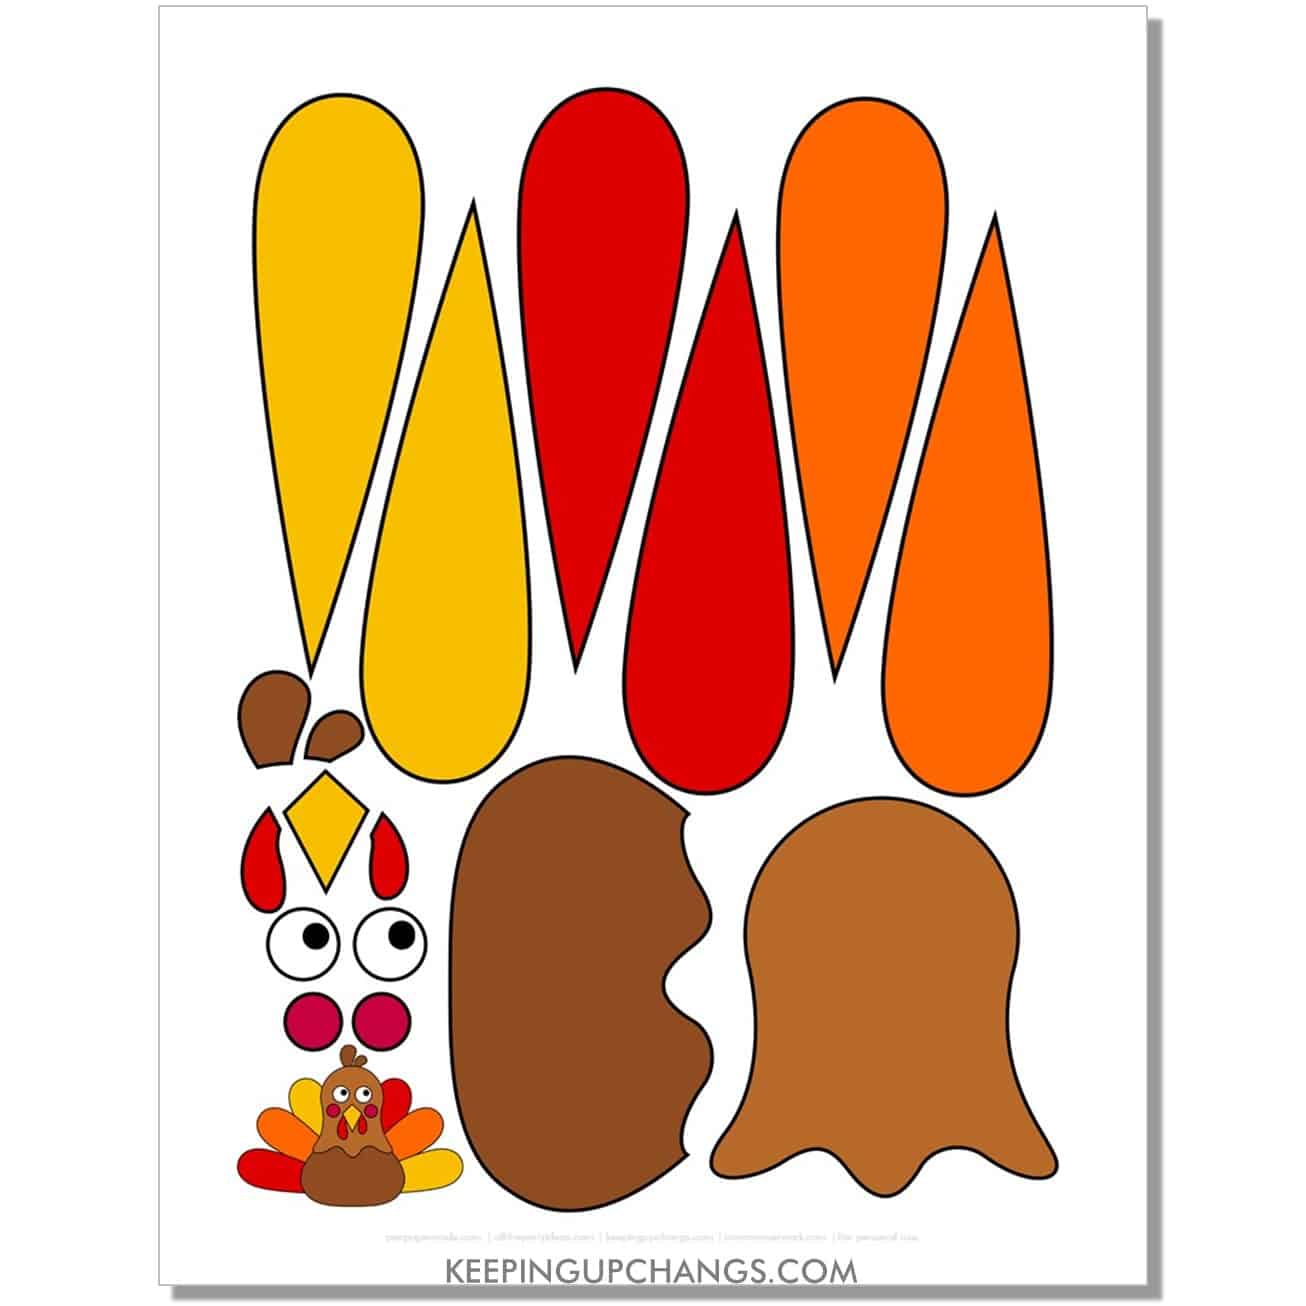 easy build a turkey template for toddler with feathers, body, hat, accessories in color.